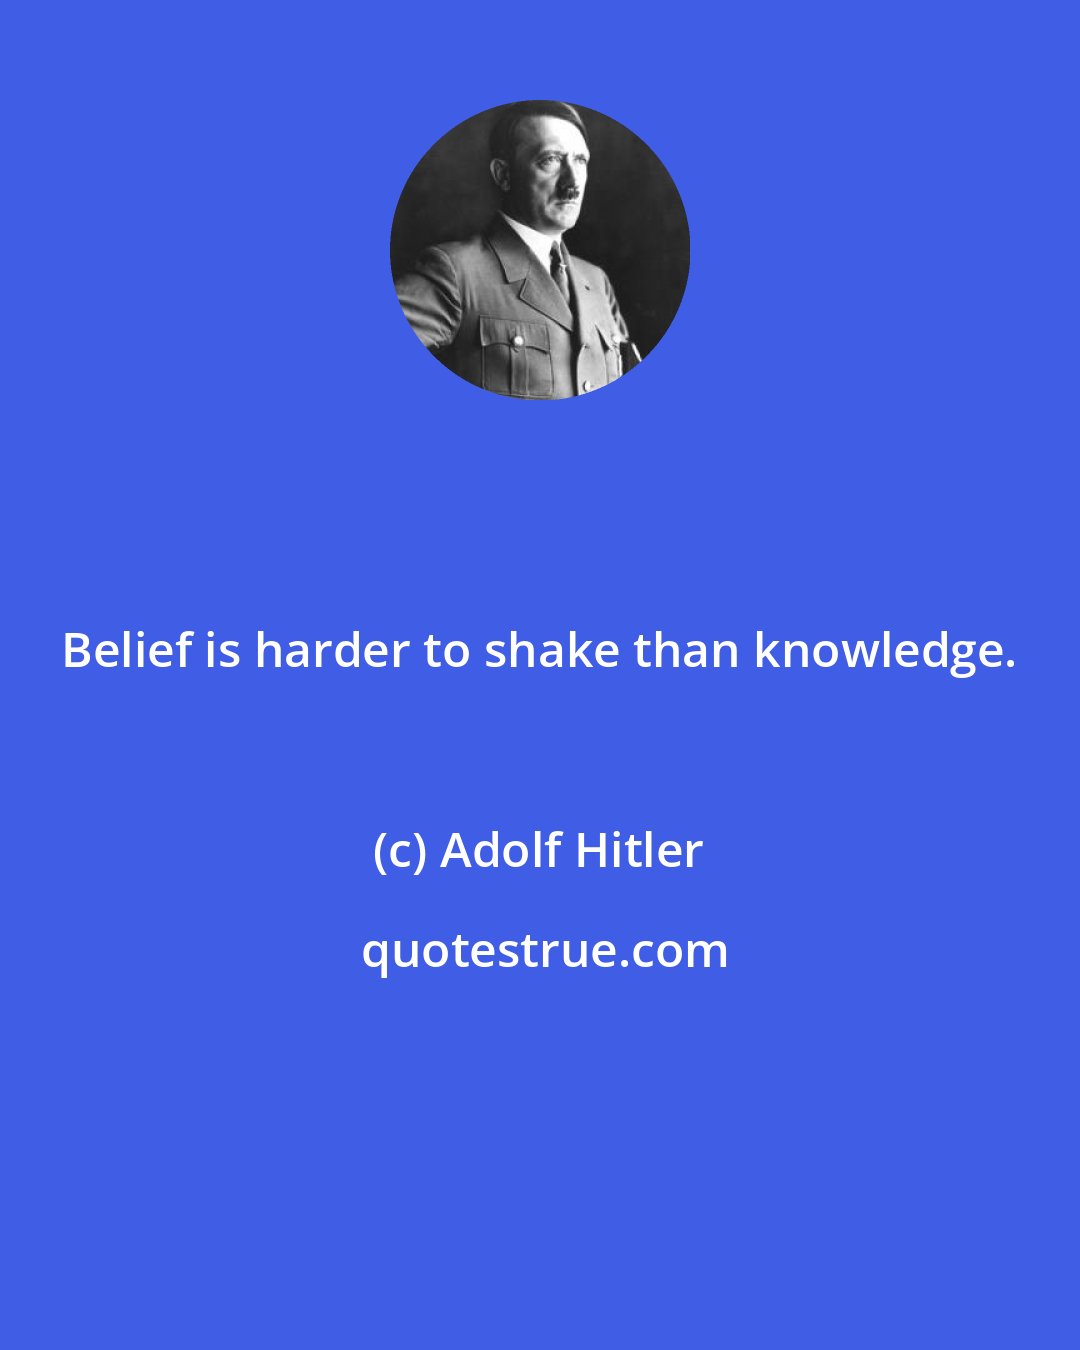 Adolf Hitler: Belief is harder to shake than knowledge.